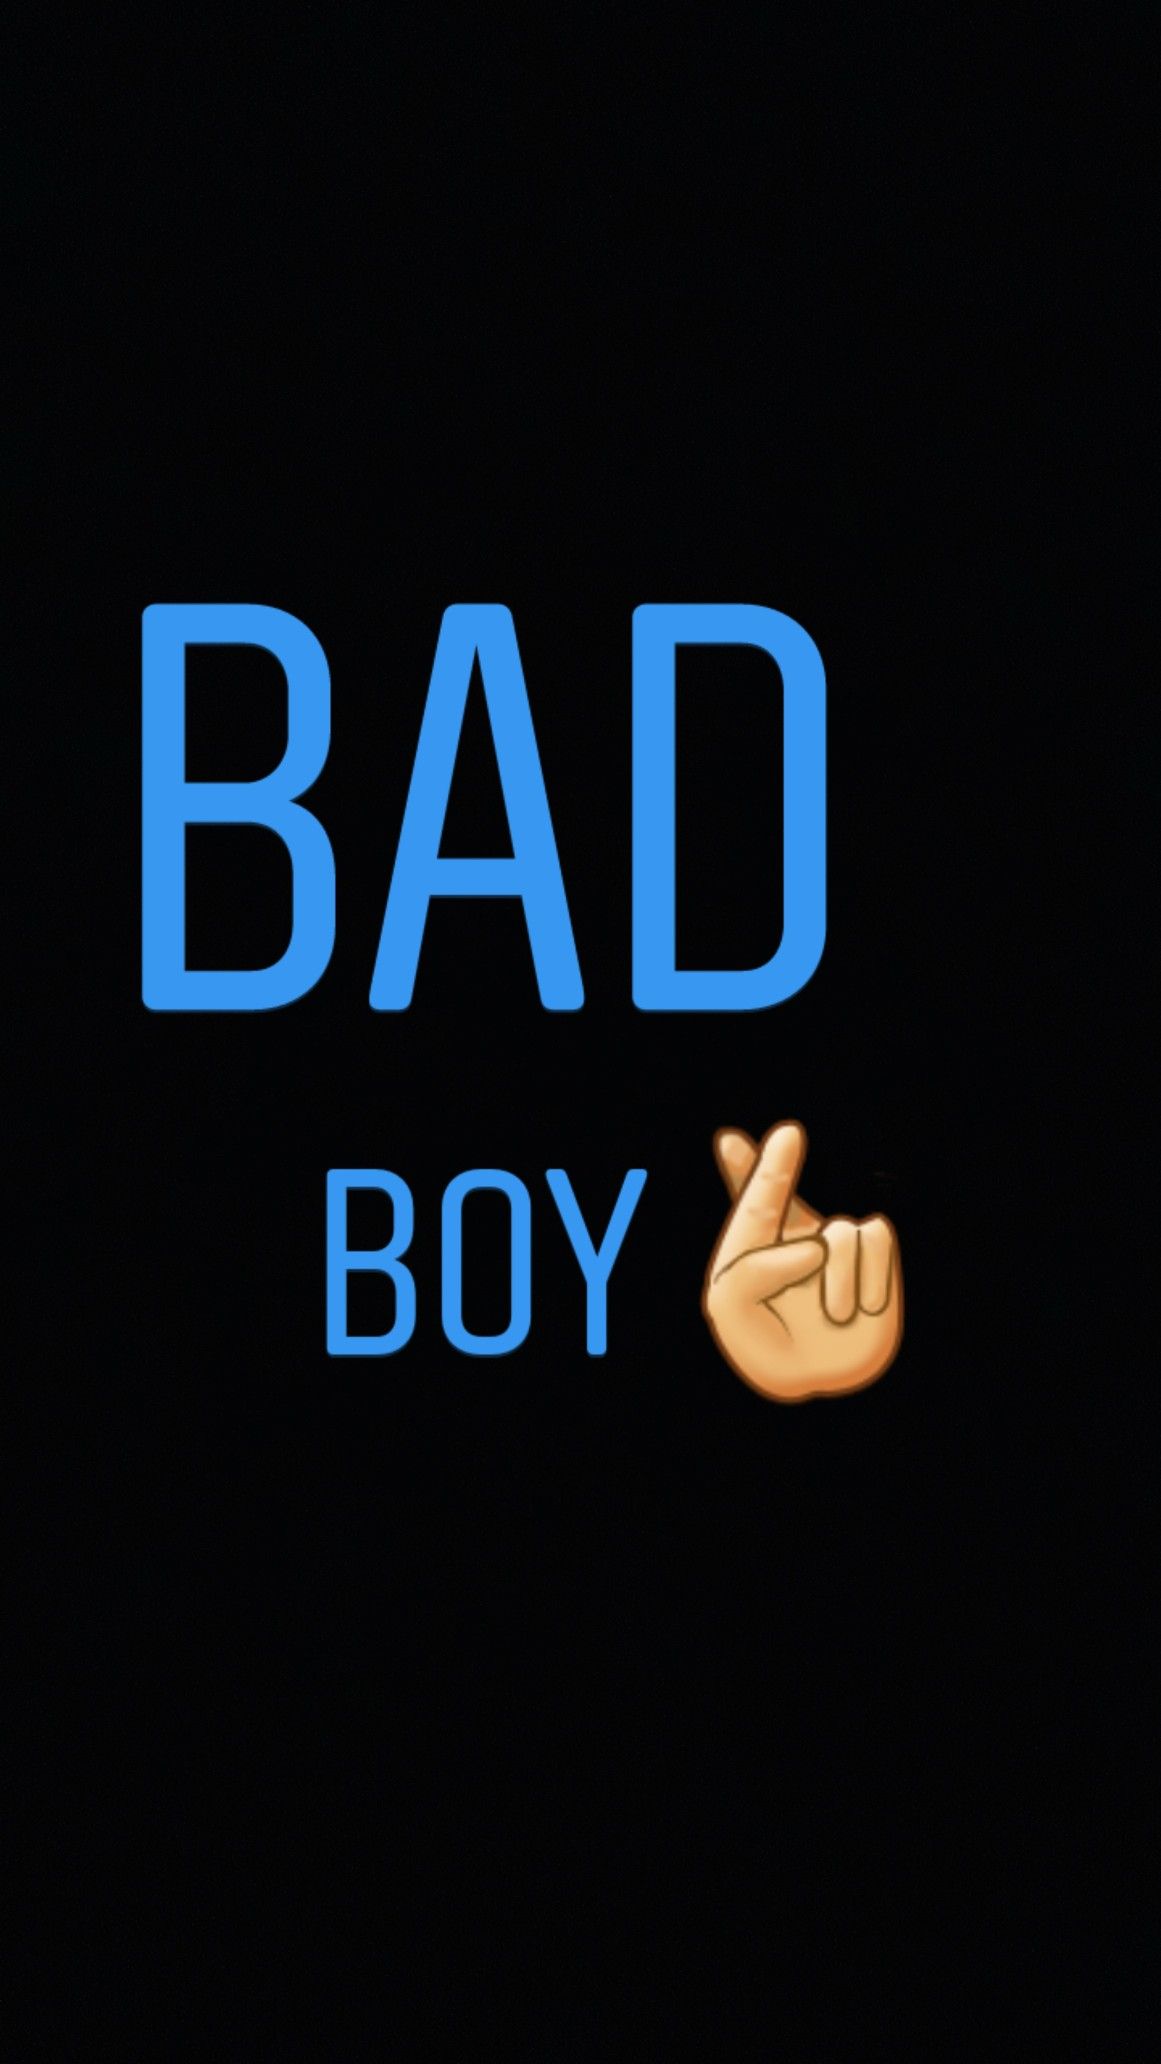 Bad boy images for whatsapp dp